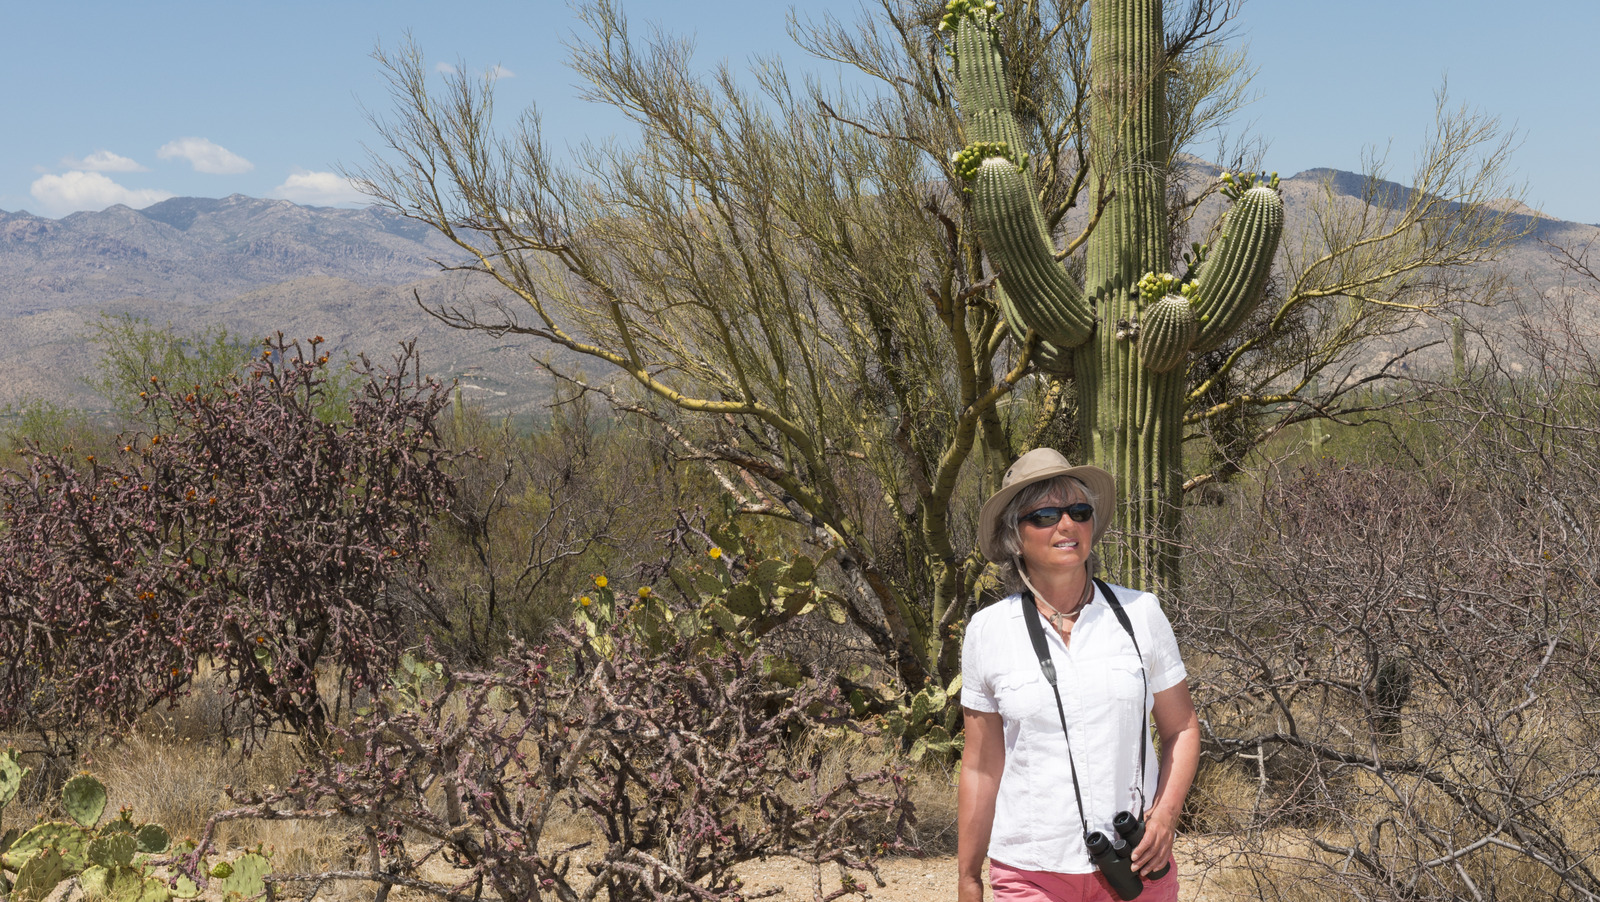 The Saguaro Cactus: All About These Desert Plants in Arizona